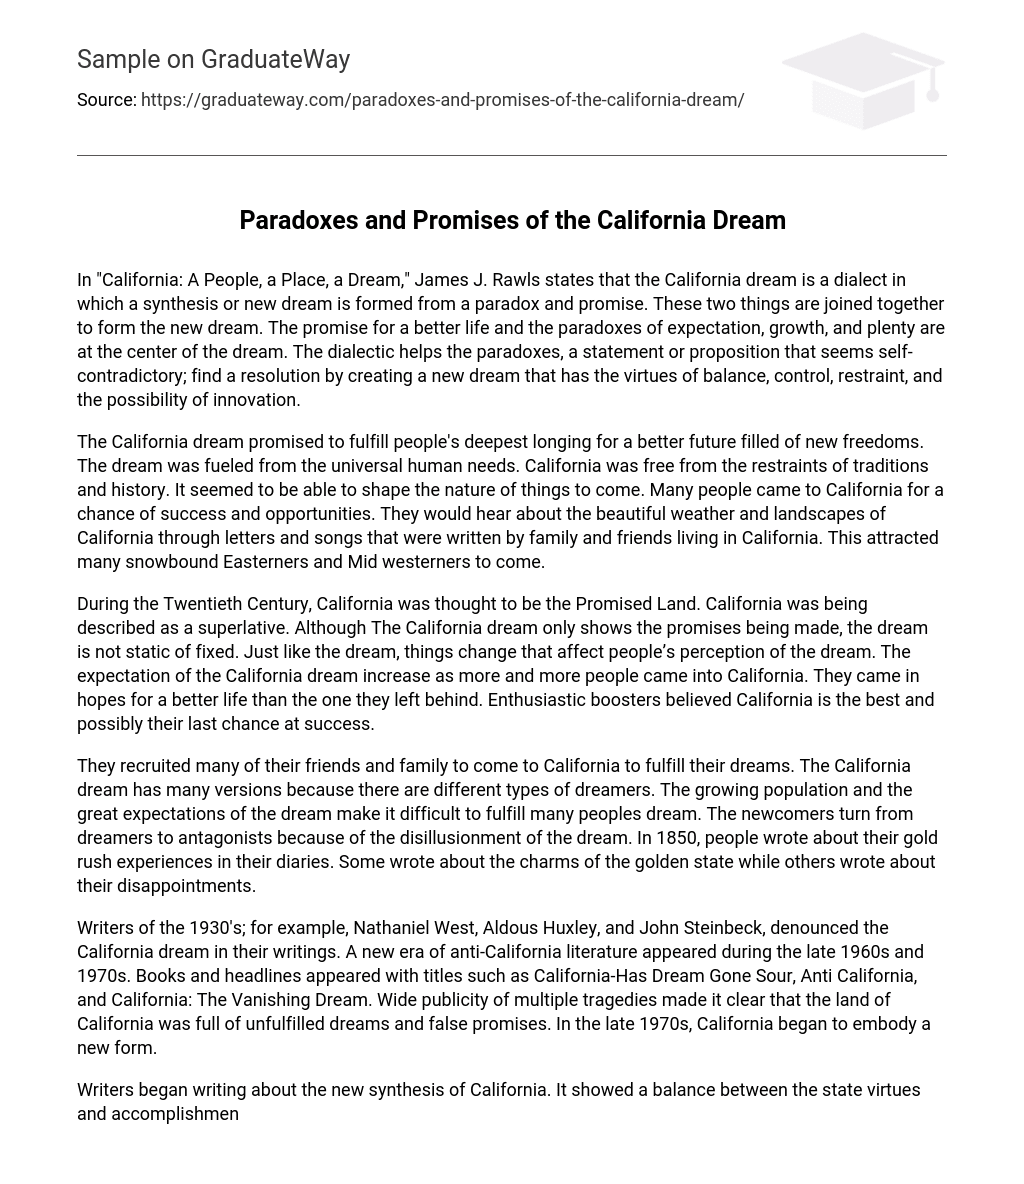 Paradoxes and Promises of the California Dream Short Summary